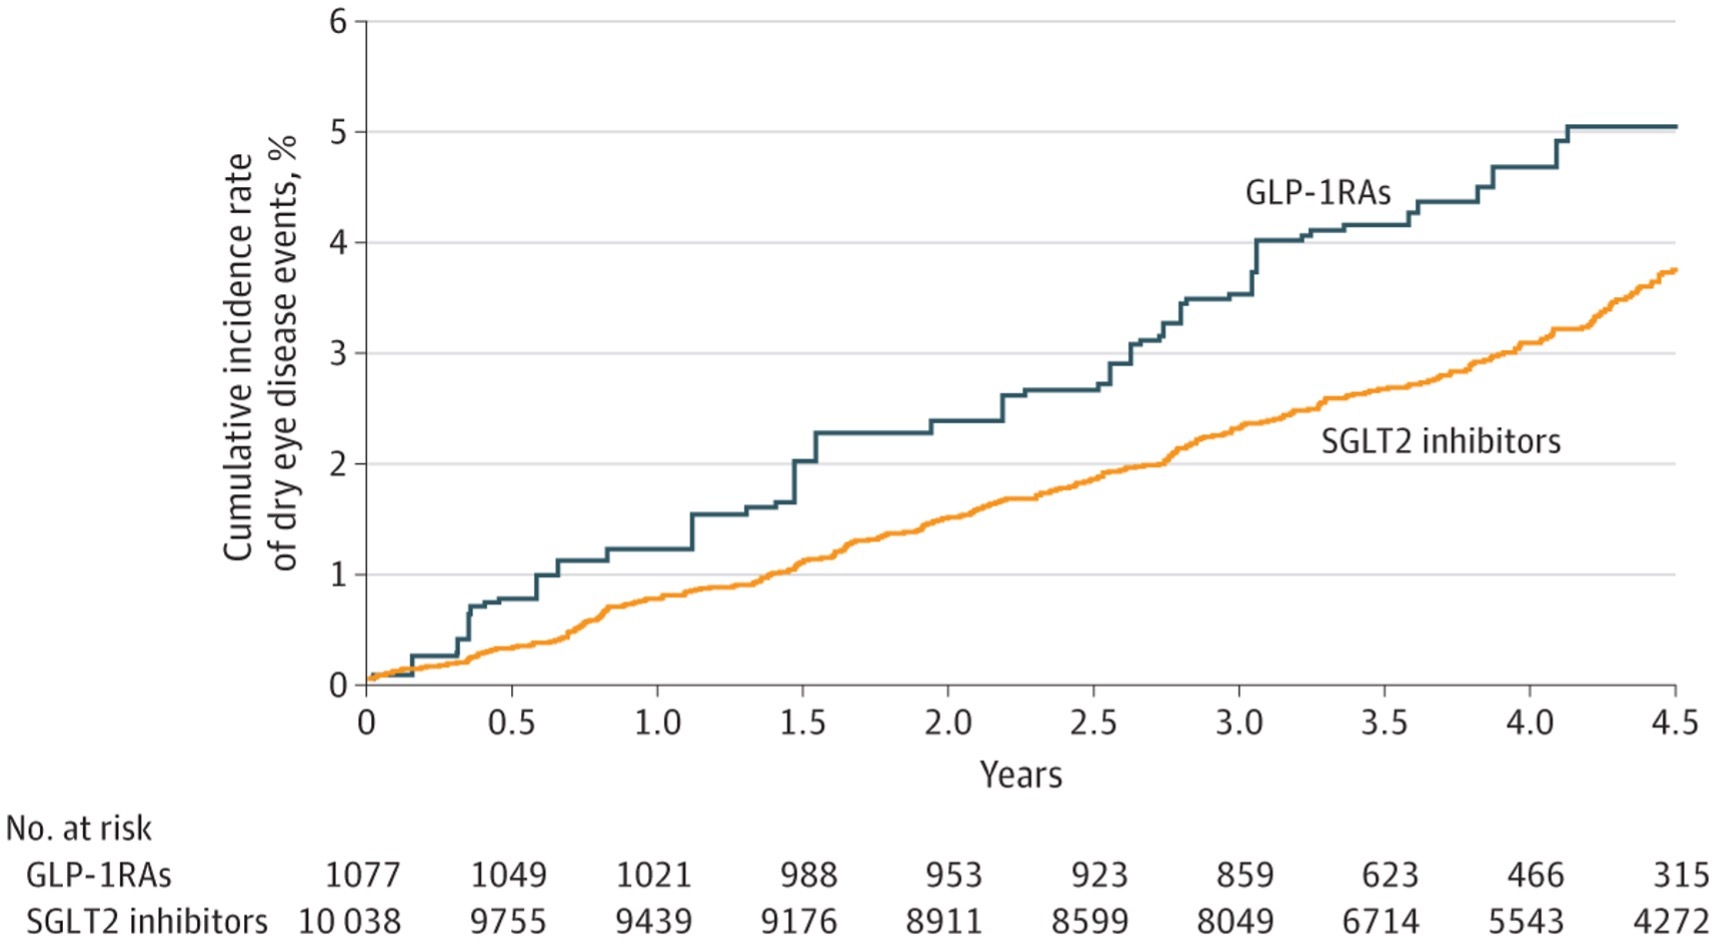 Figure. Cumulative Incidence of Dry Eye Disease Between Sodium-Glucose Cotransporter 2 (SGLT2) Inhibitor and Glucagonlike Peptide-1 Receptor Agonist (GLP-1 RA) Use After Inverse Probability of Treatment Weighting Adjustment.